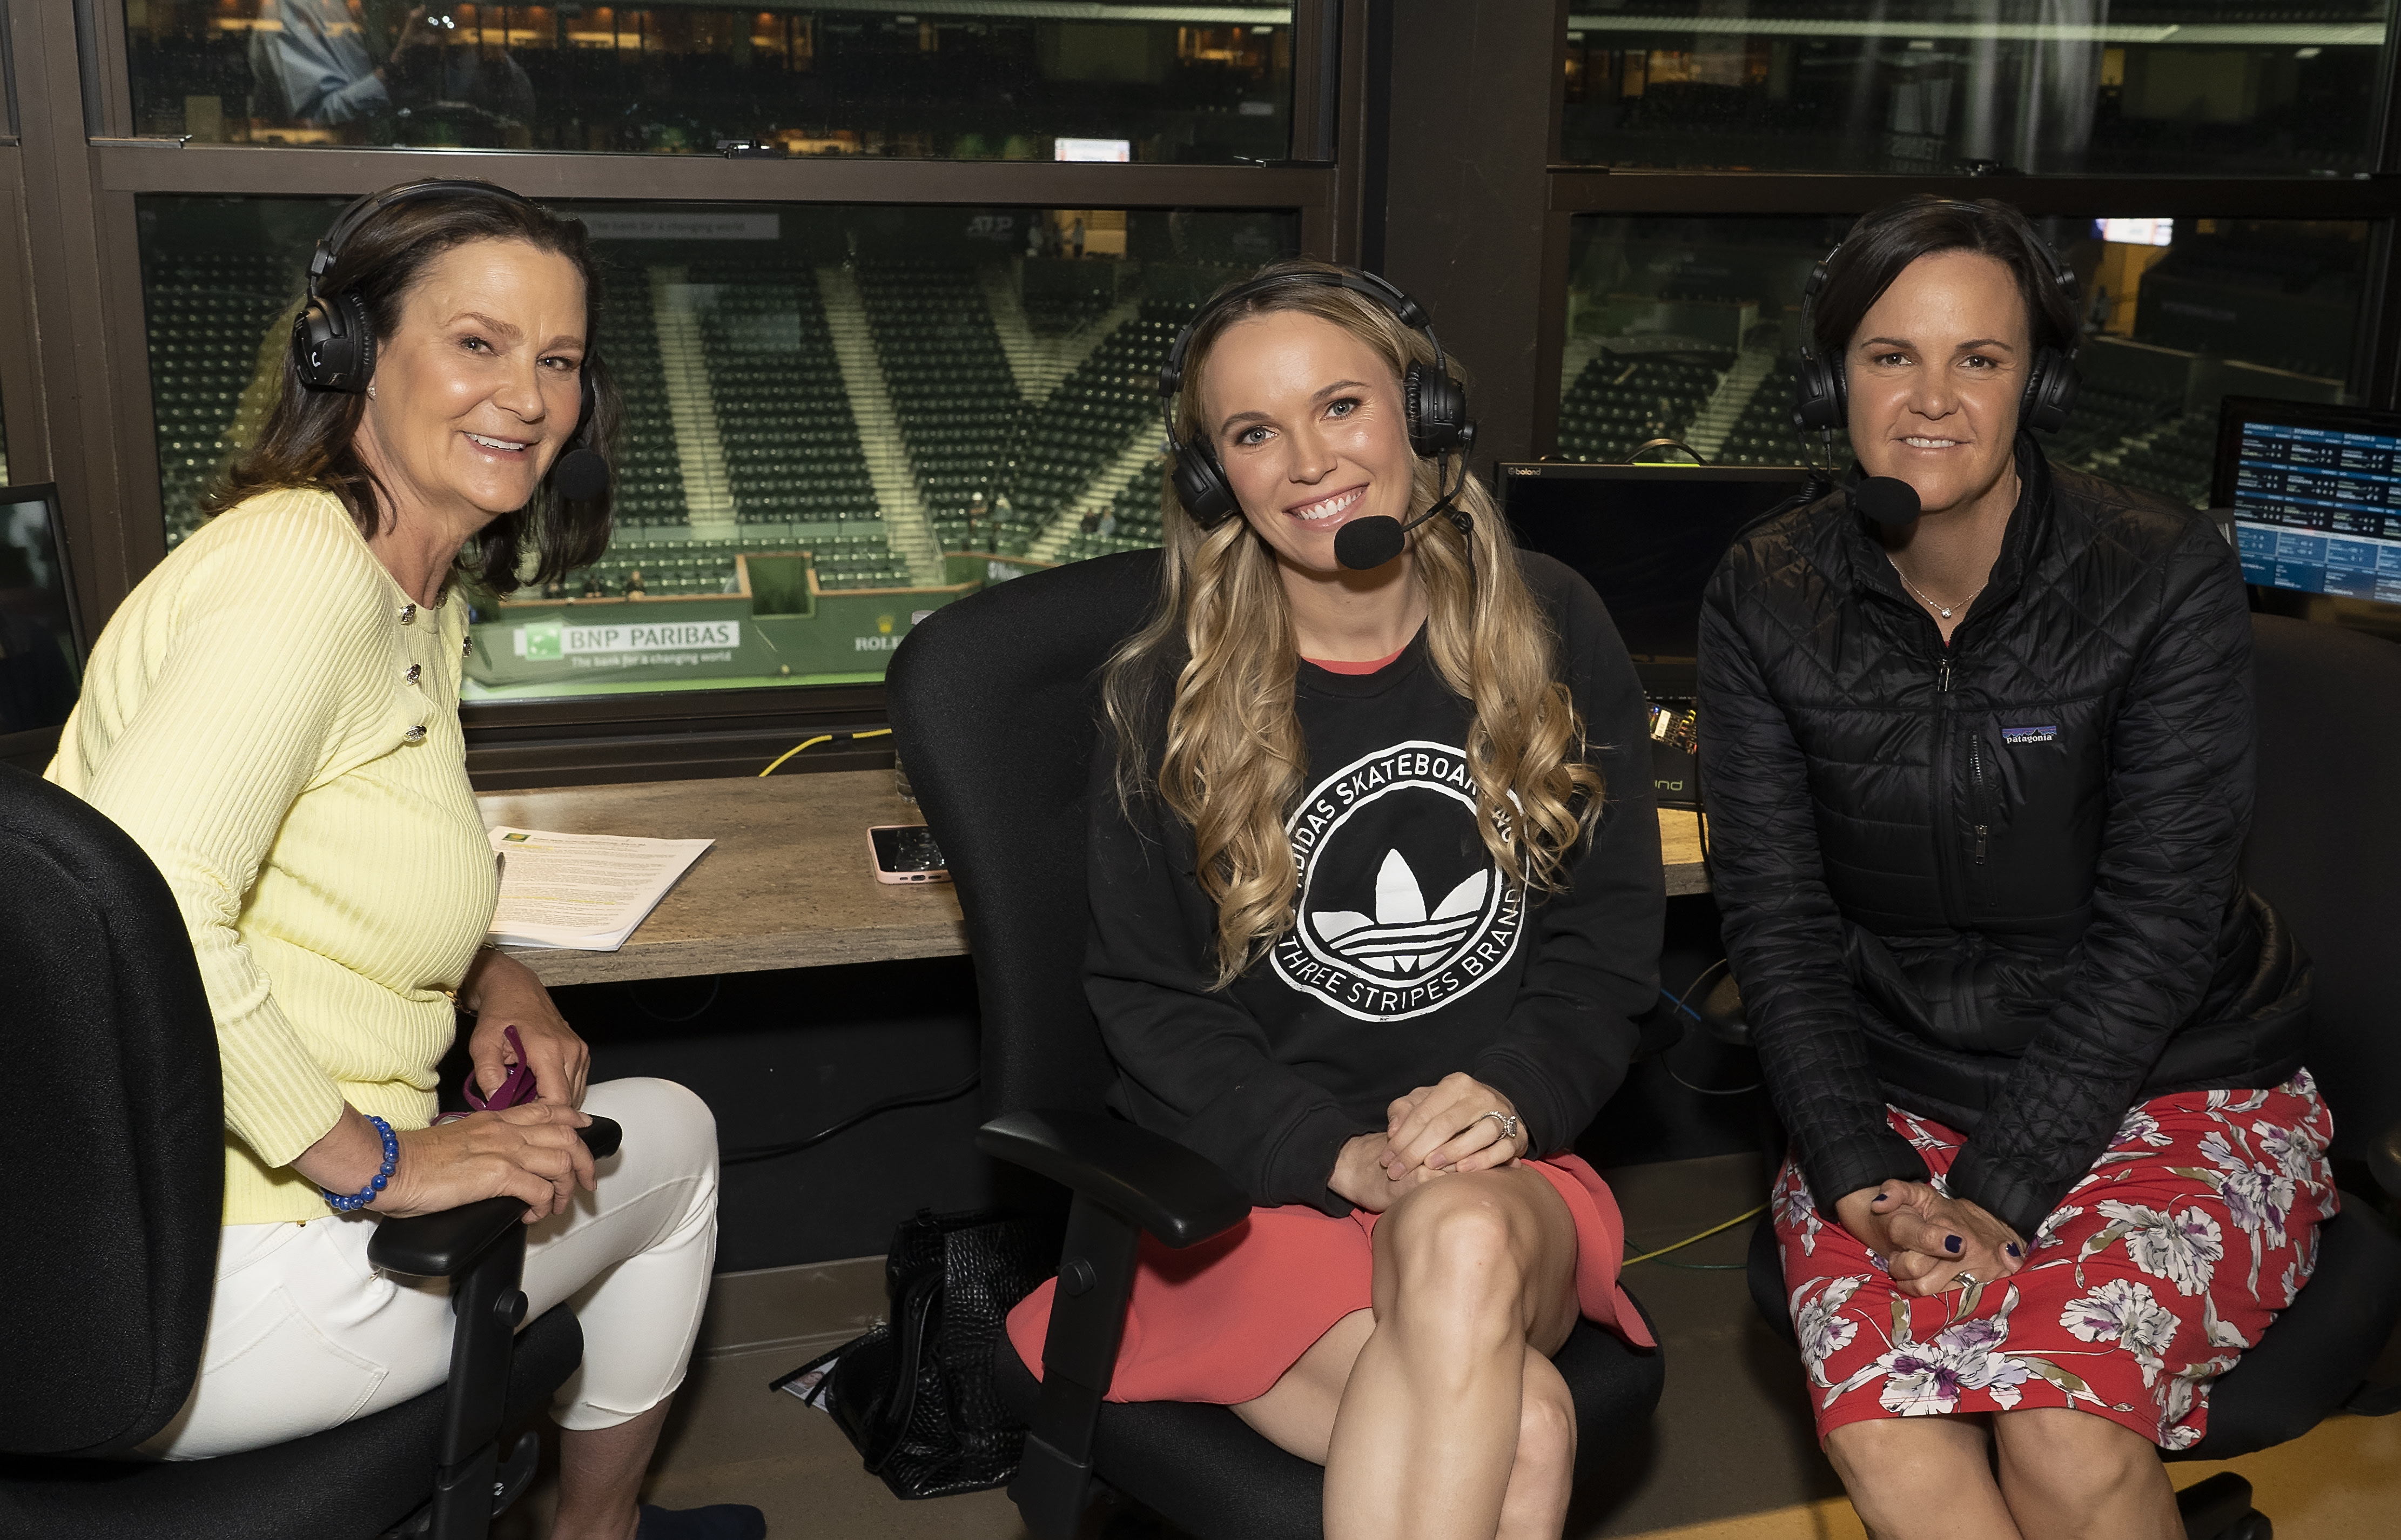 Caroline Wozniacki pushes boundaries as Tennis Channel host and commentator at Indian Wells